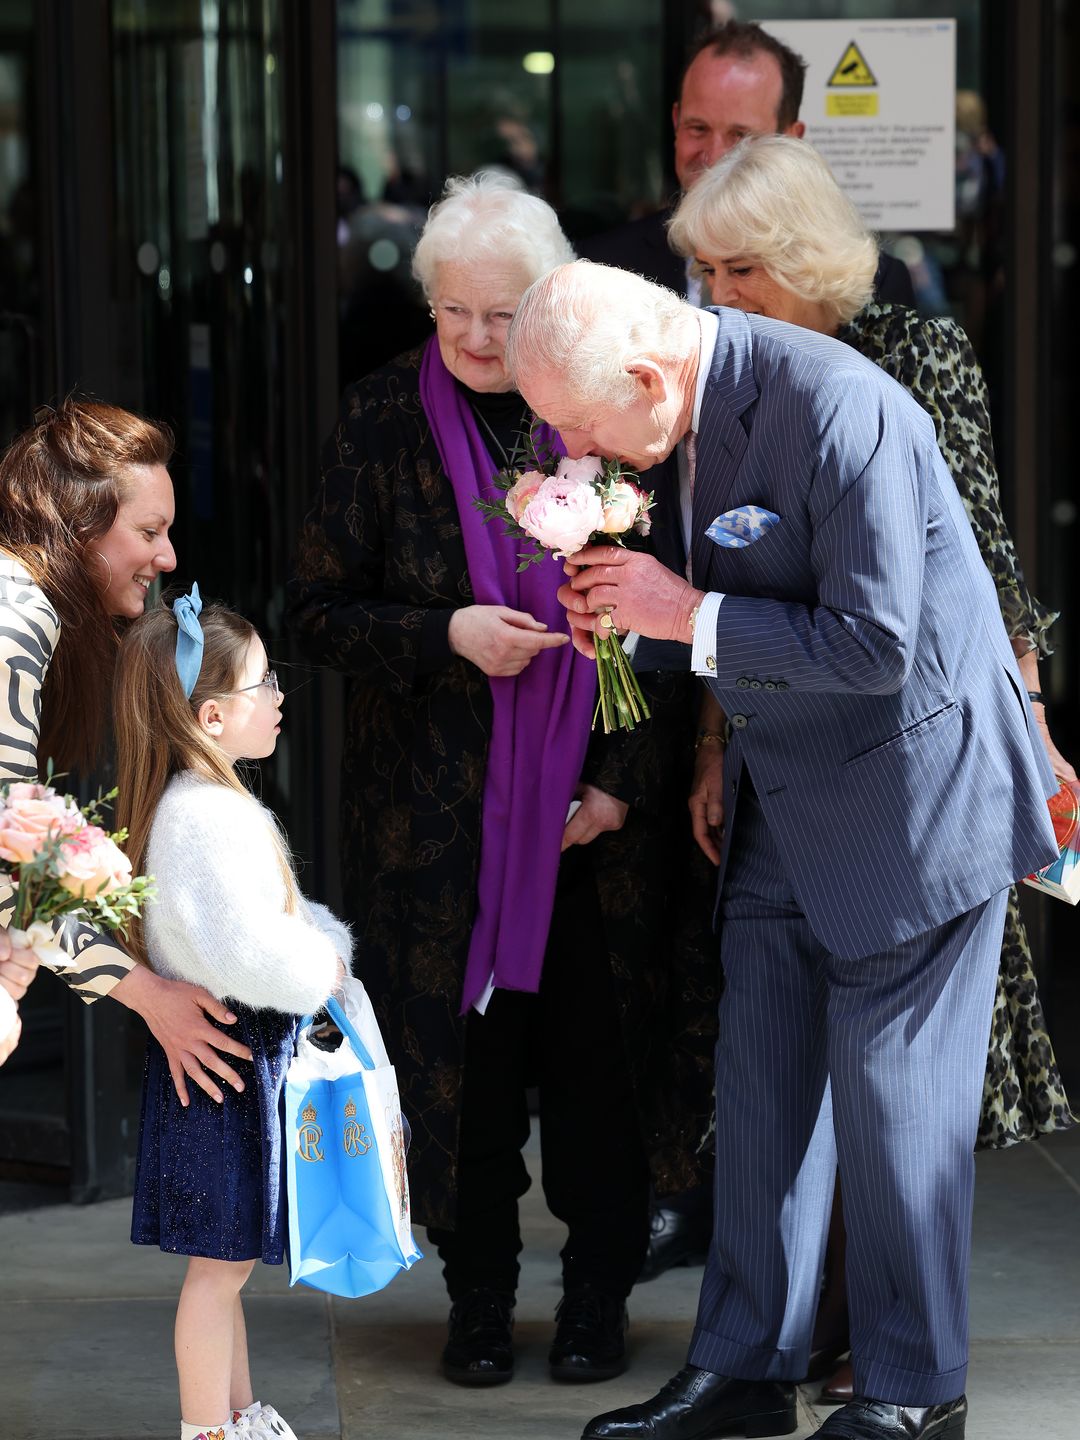 King Charles receiving a bunch of flowers from a young girl